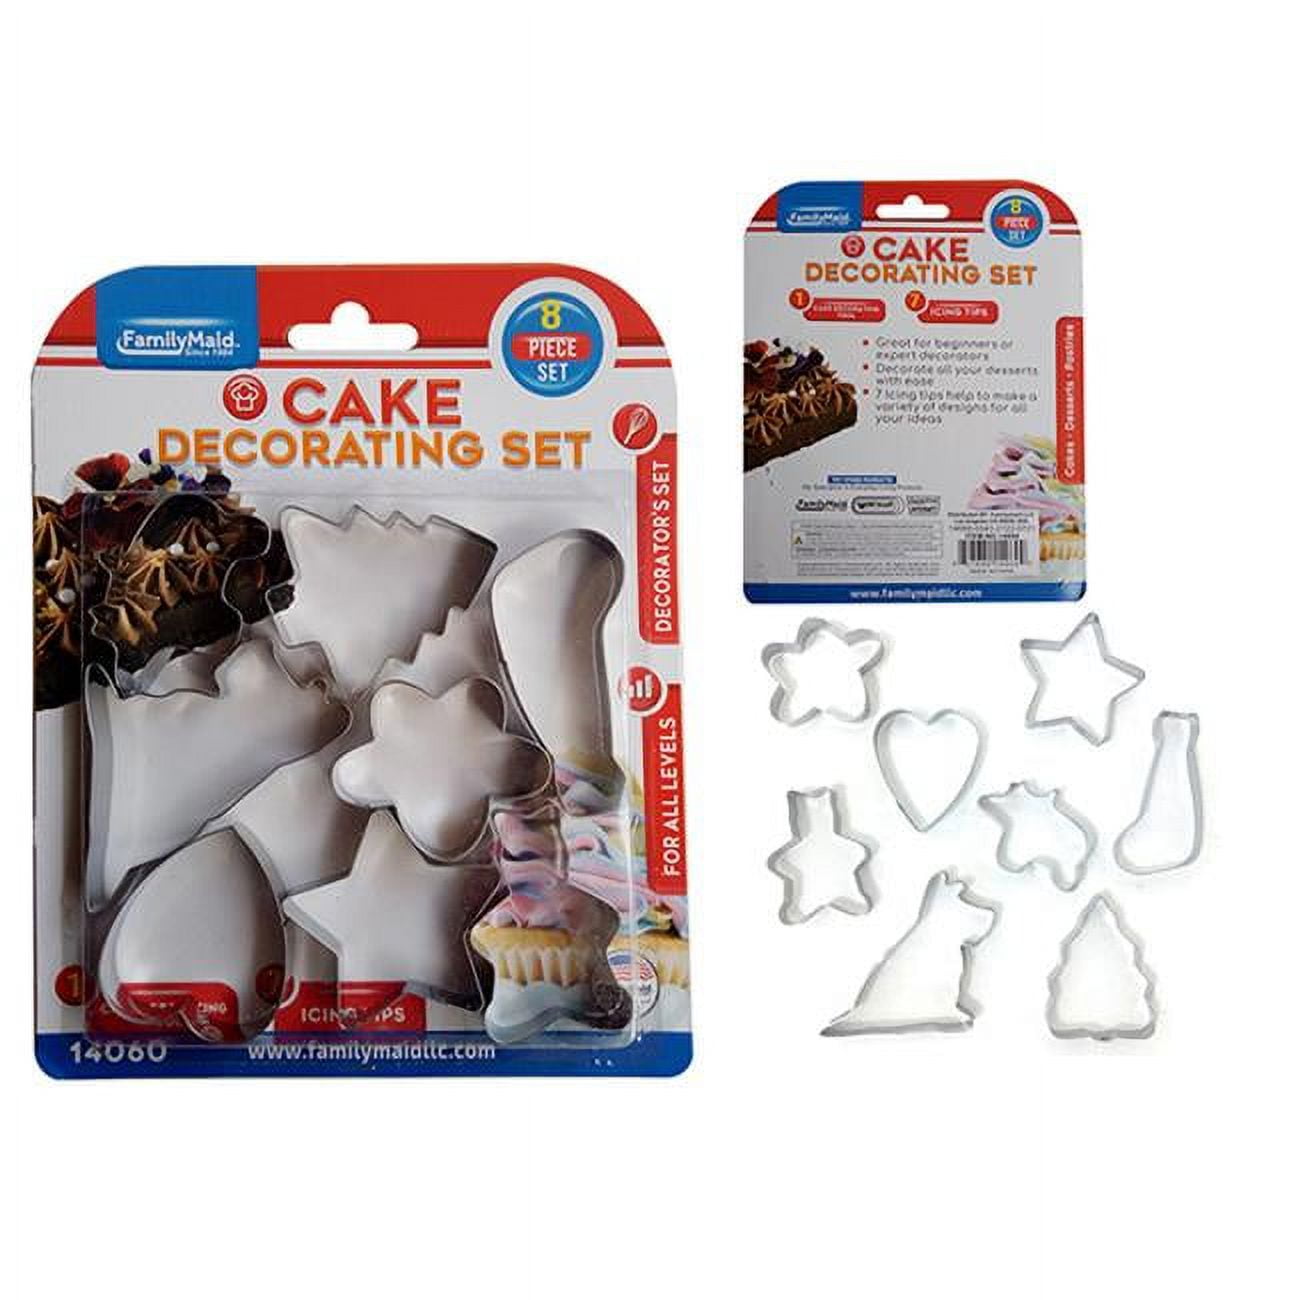 Picture of Familymaid 14060 Metal Stainless Steel Cookie Cutter - 8 Piece